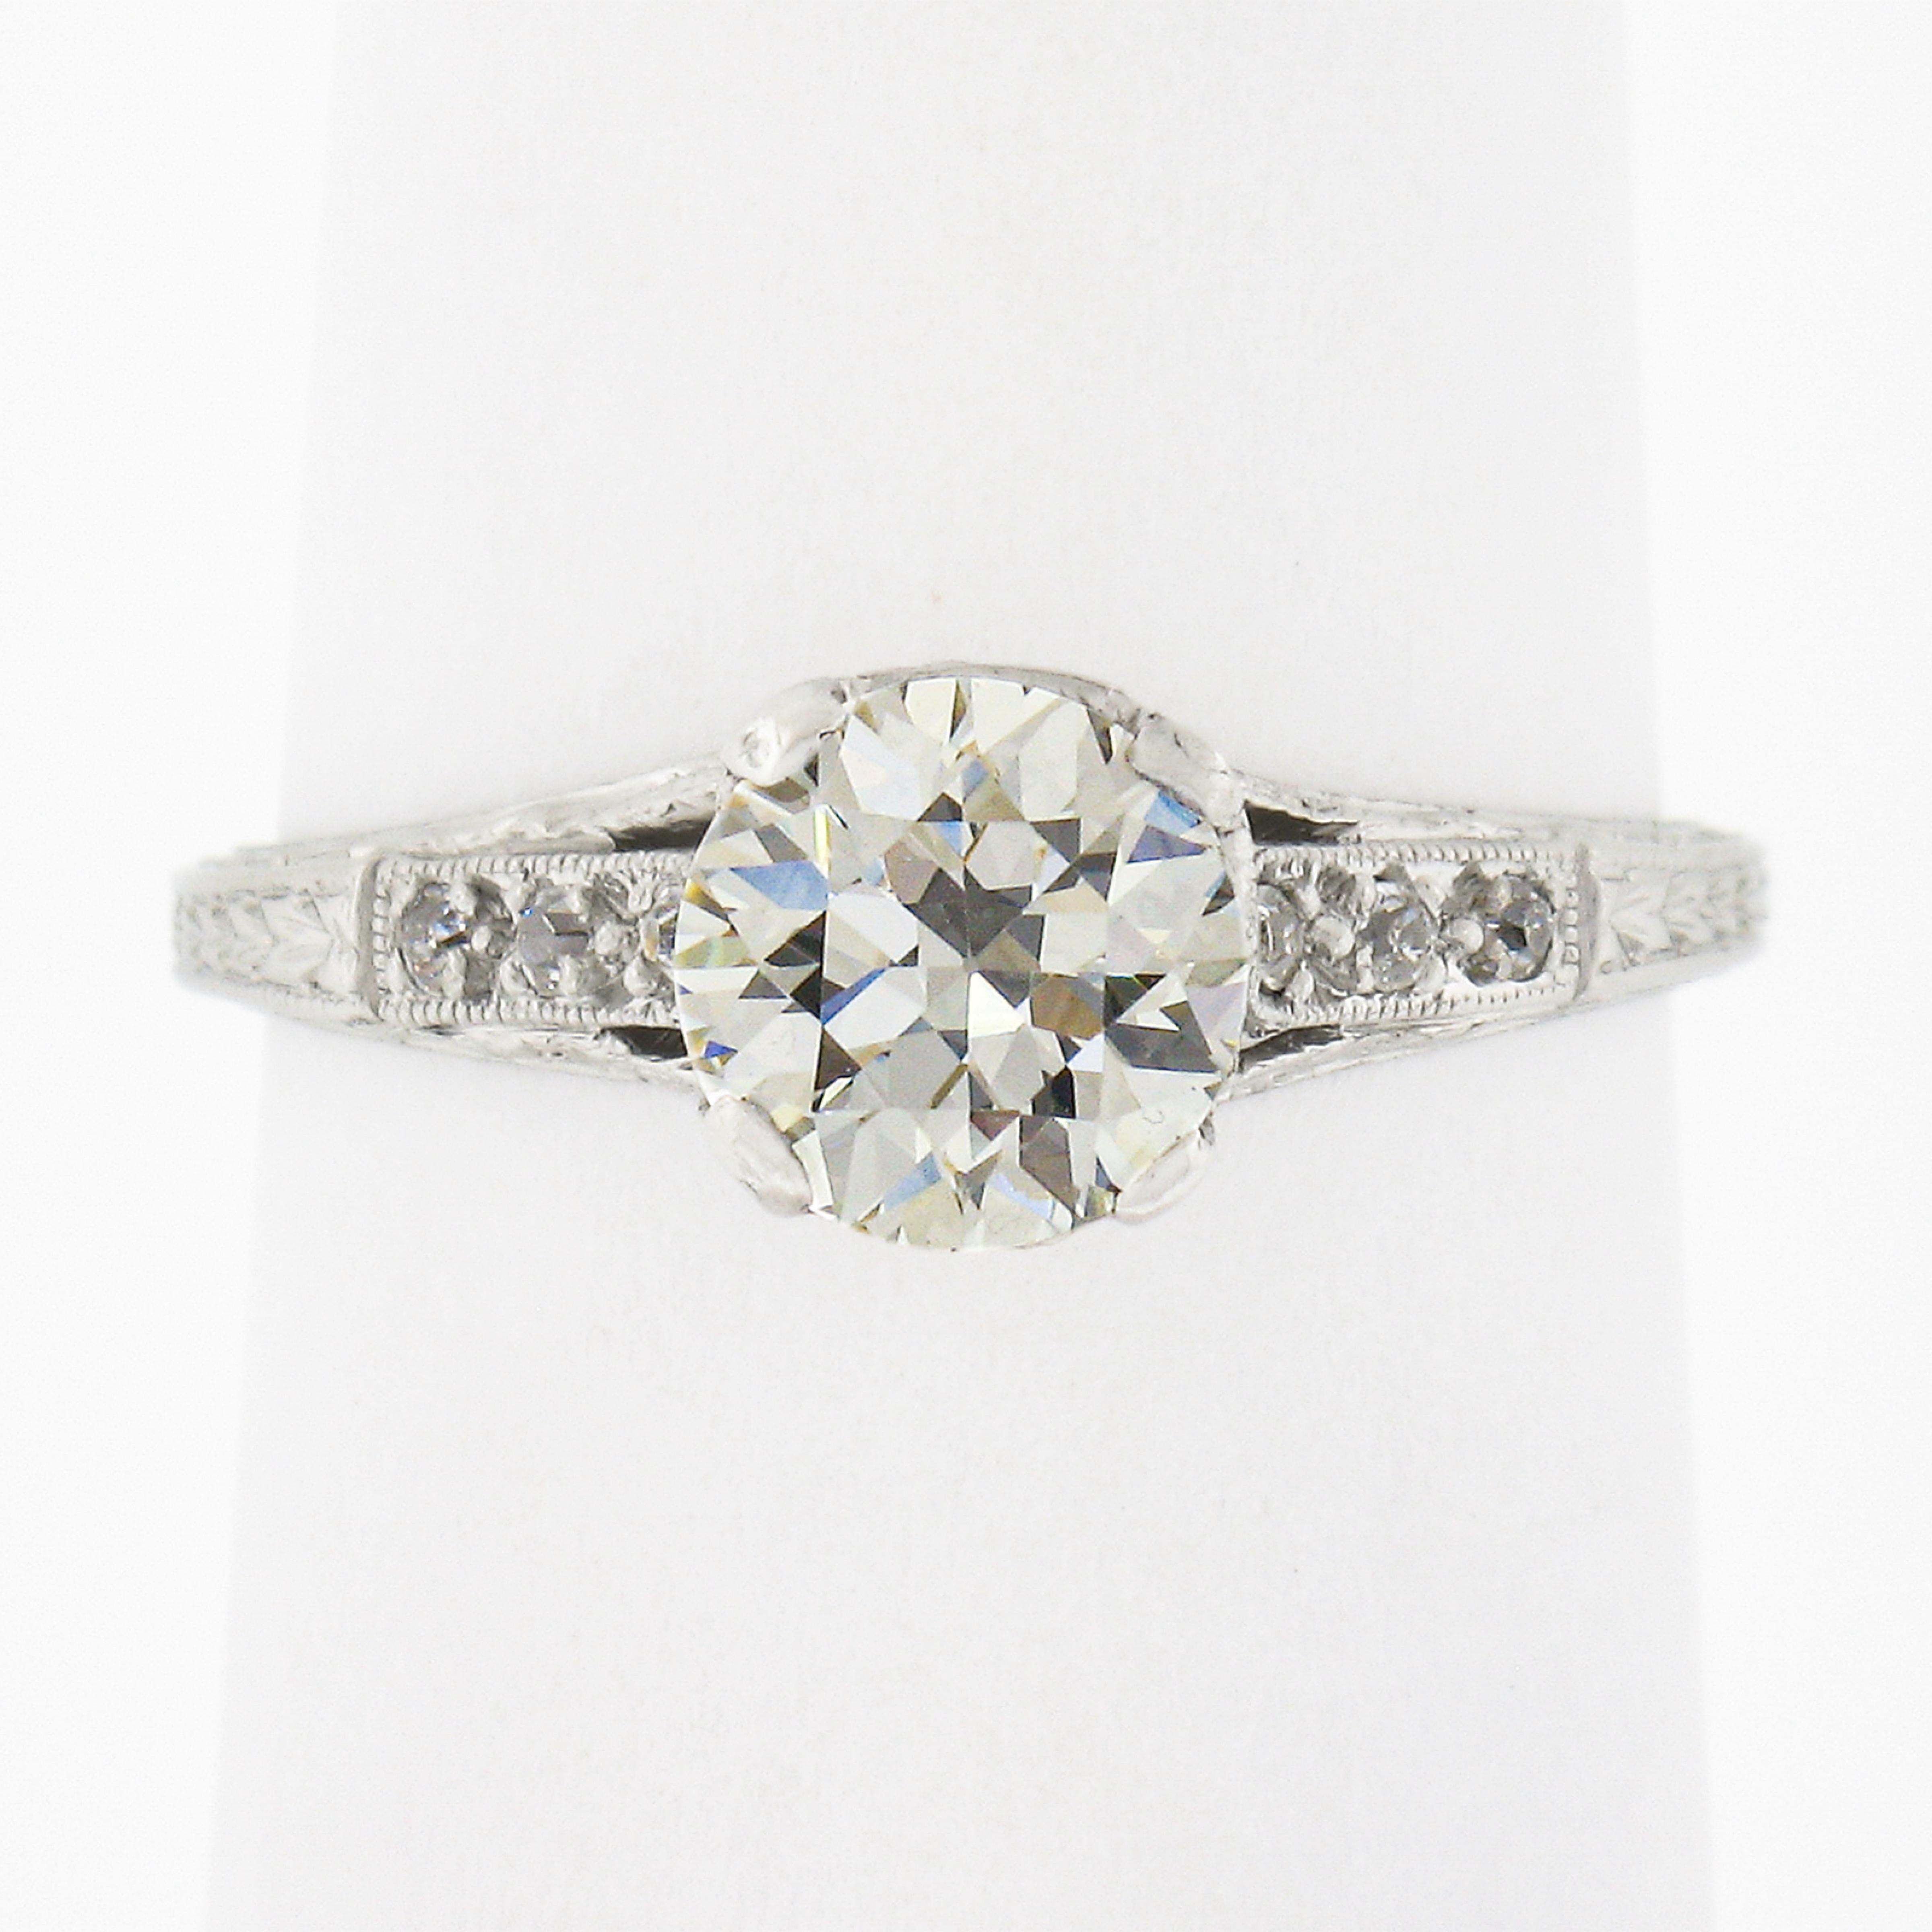 This is a gorgeous antique engagement ring that was crafted from solid platinum during the Edwardian period. It features a stunning old European cut diamond solitaire neatly set at the center, and displays a very attractive size, weighing